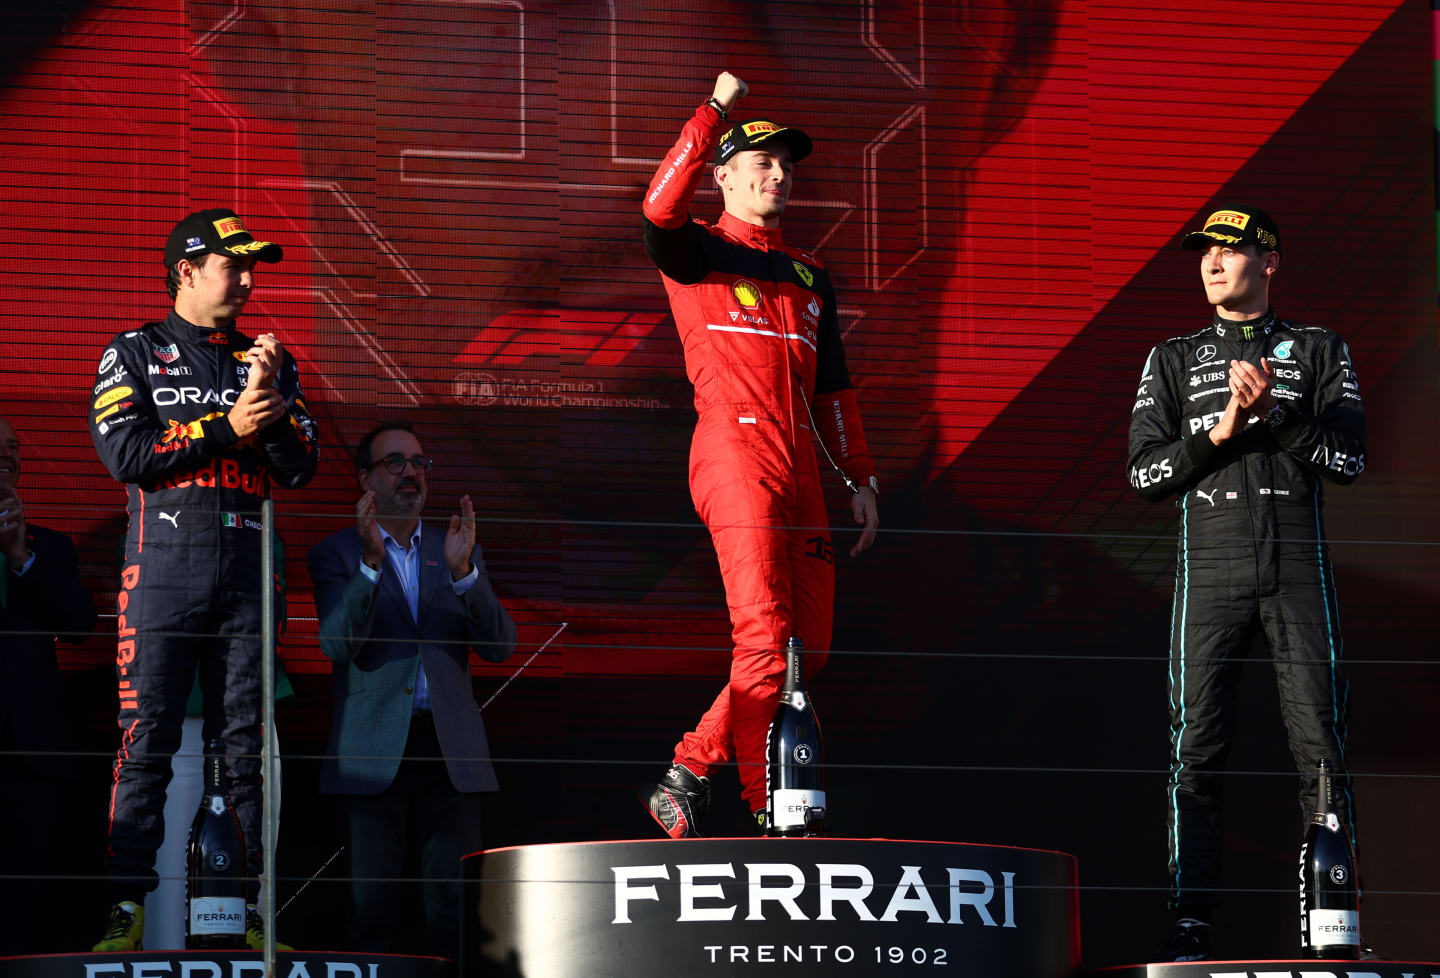 MELBOURNE, AUSTRALIA - APRIL 10: Race winner Charles Leclerc of Monaco and Ferrari celebrates on the podium next to Second placed Sergio Perez of Mexico and Oracle Red Bull Racing and Third placed George Russell of Great Britain and Mercedes during the F1 Grand Prix of Australia at Melbourne Grand Prix Circuit on April 10, 2022 in Melbourne, Australia. (Photo by Bryn Lennon - Formula 1/Formula 1 via Getty Images)